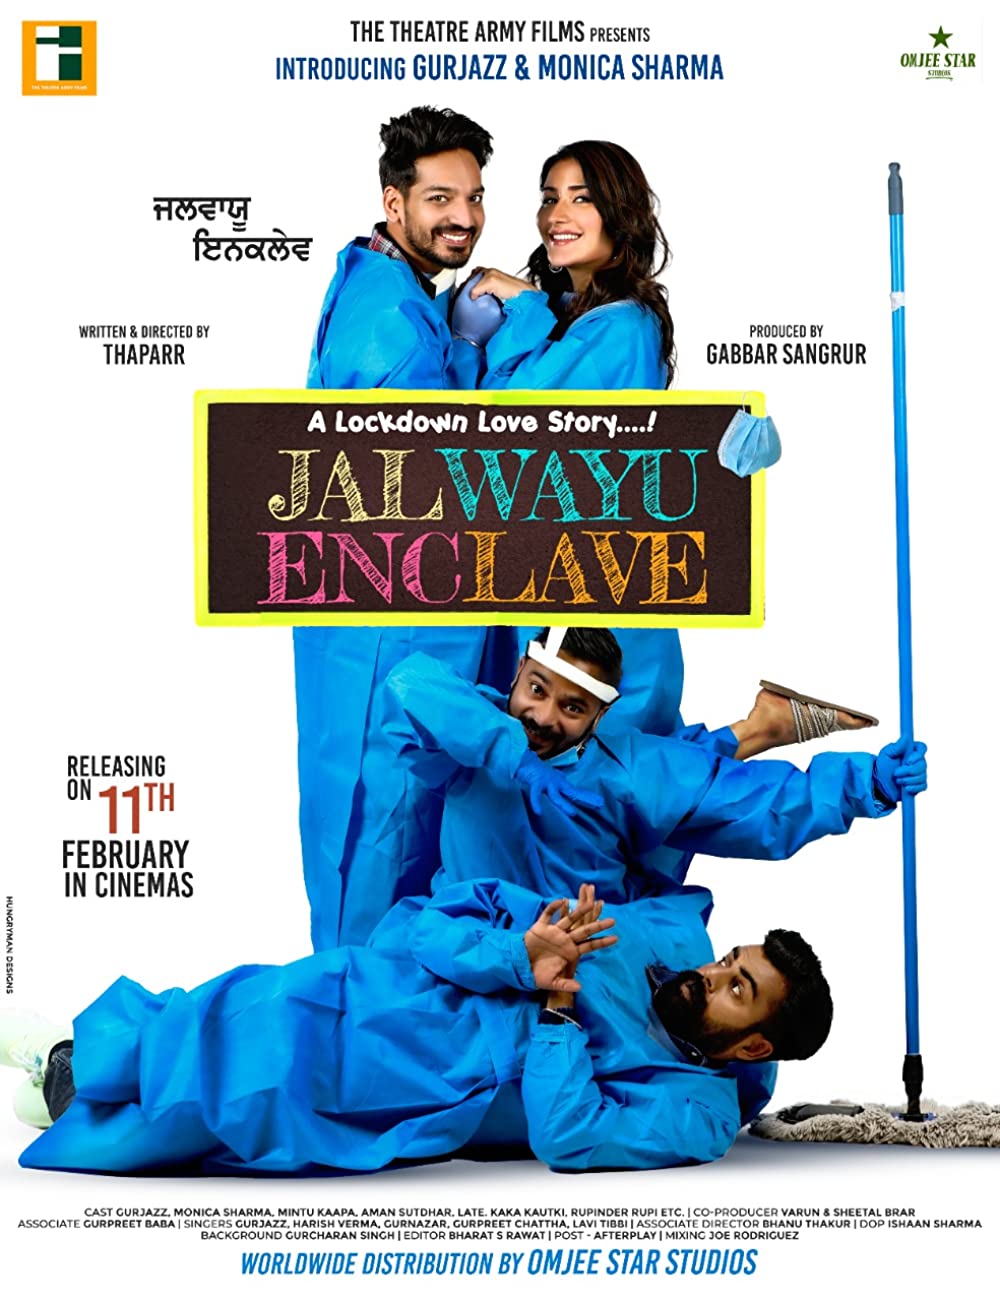 Jal Wayu Enclave Torrent Kickass in HD quality 1080p and 720p 2022 Movie | kat | tpb Screen Shot 1